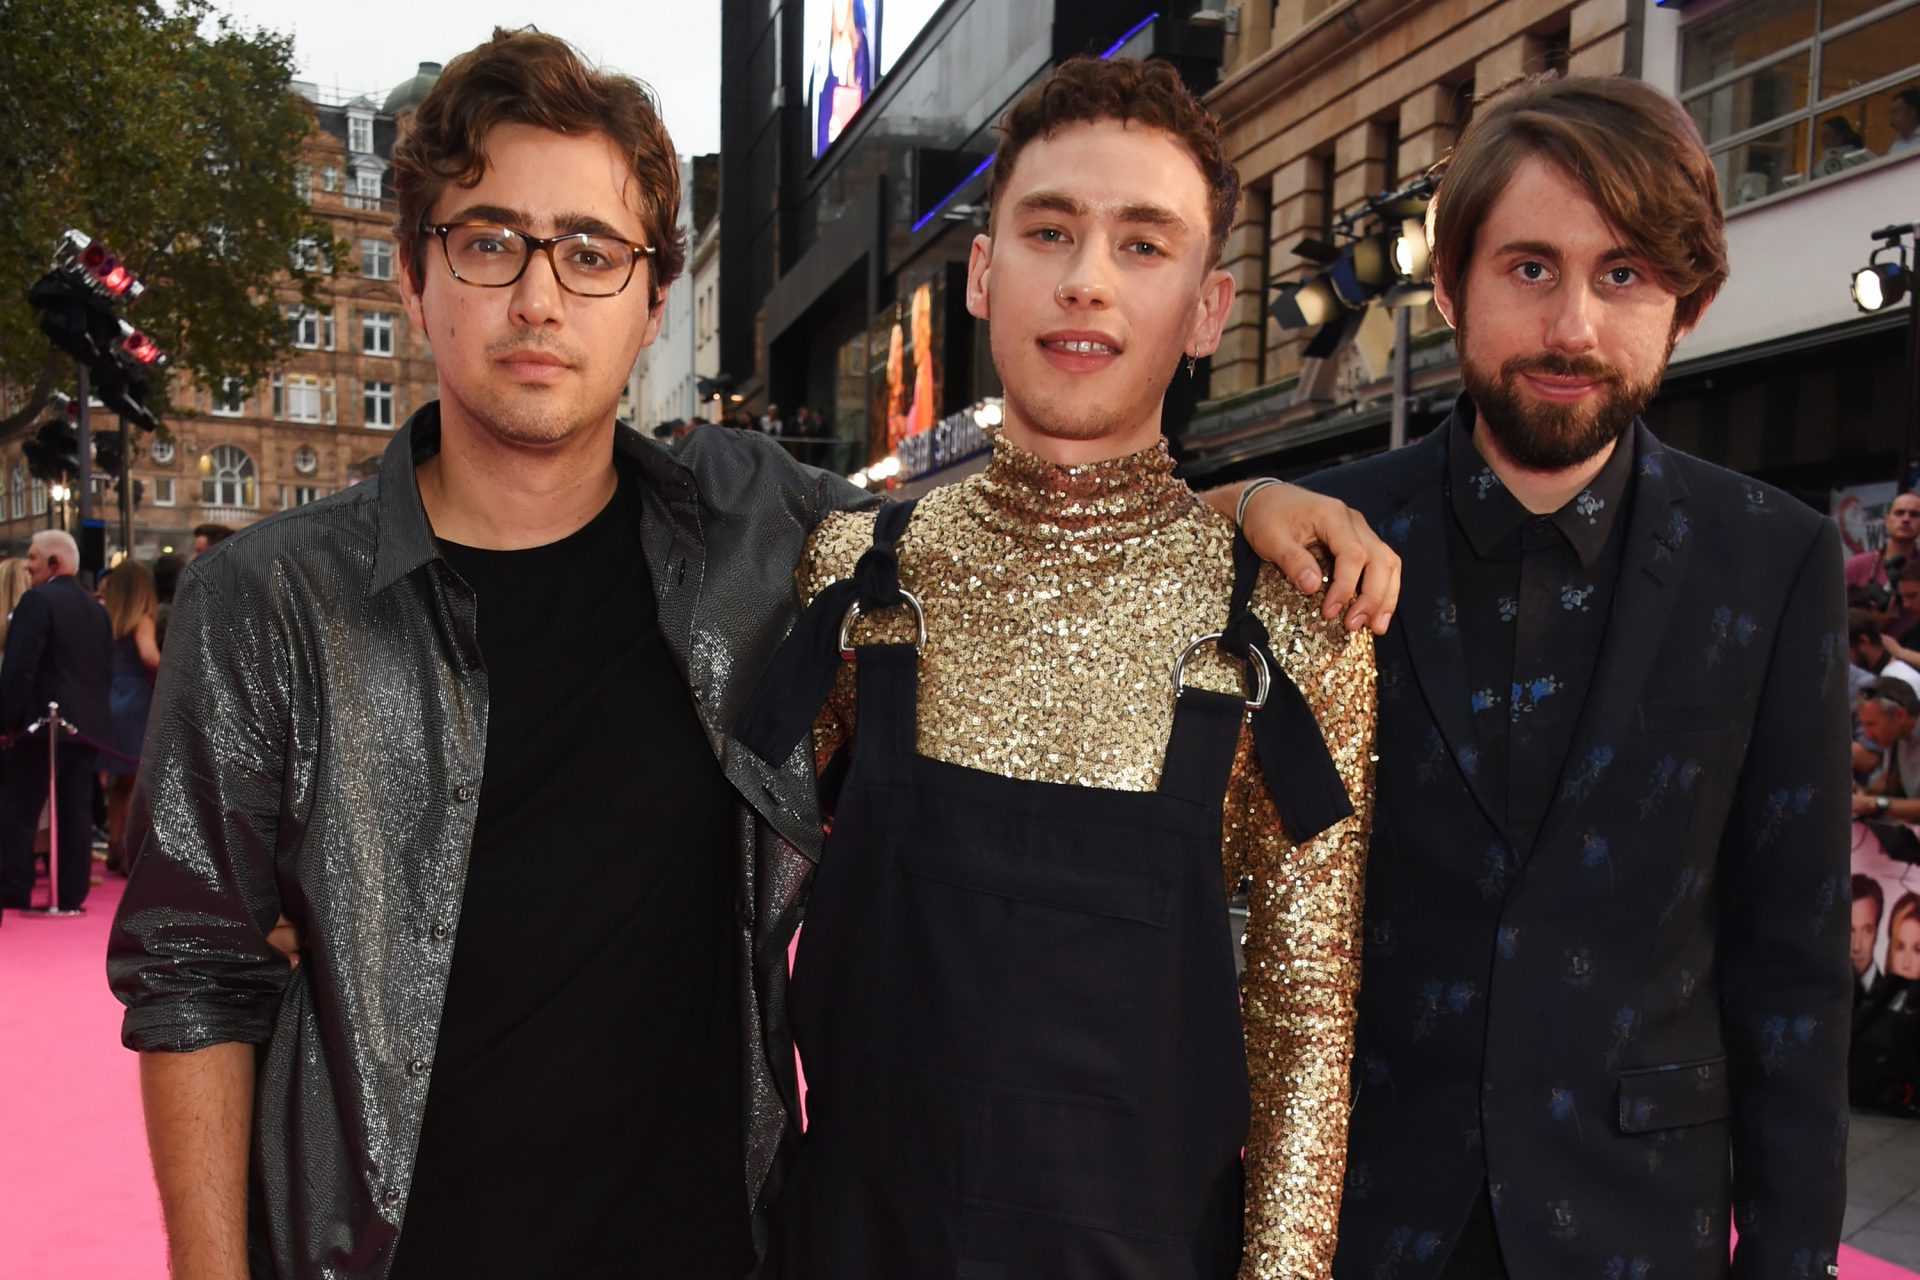 Years & Years became a one-man act